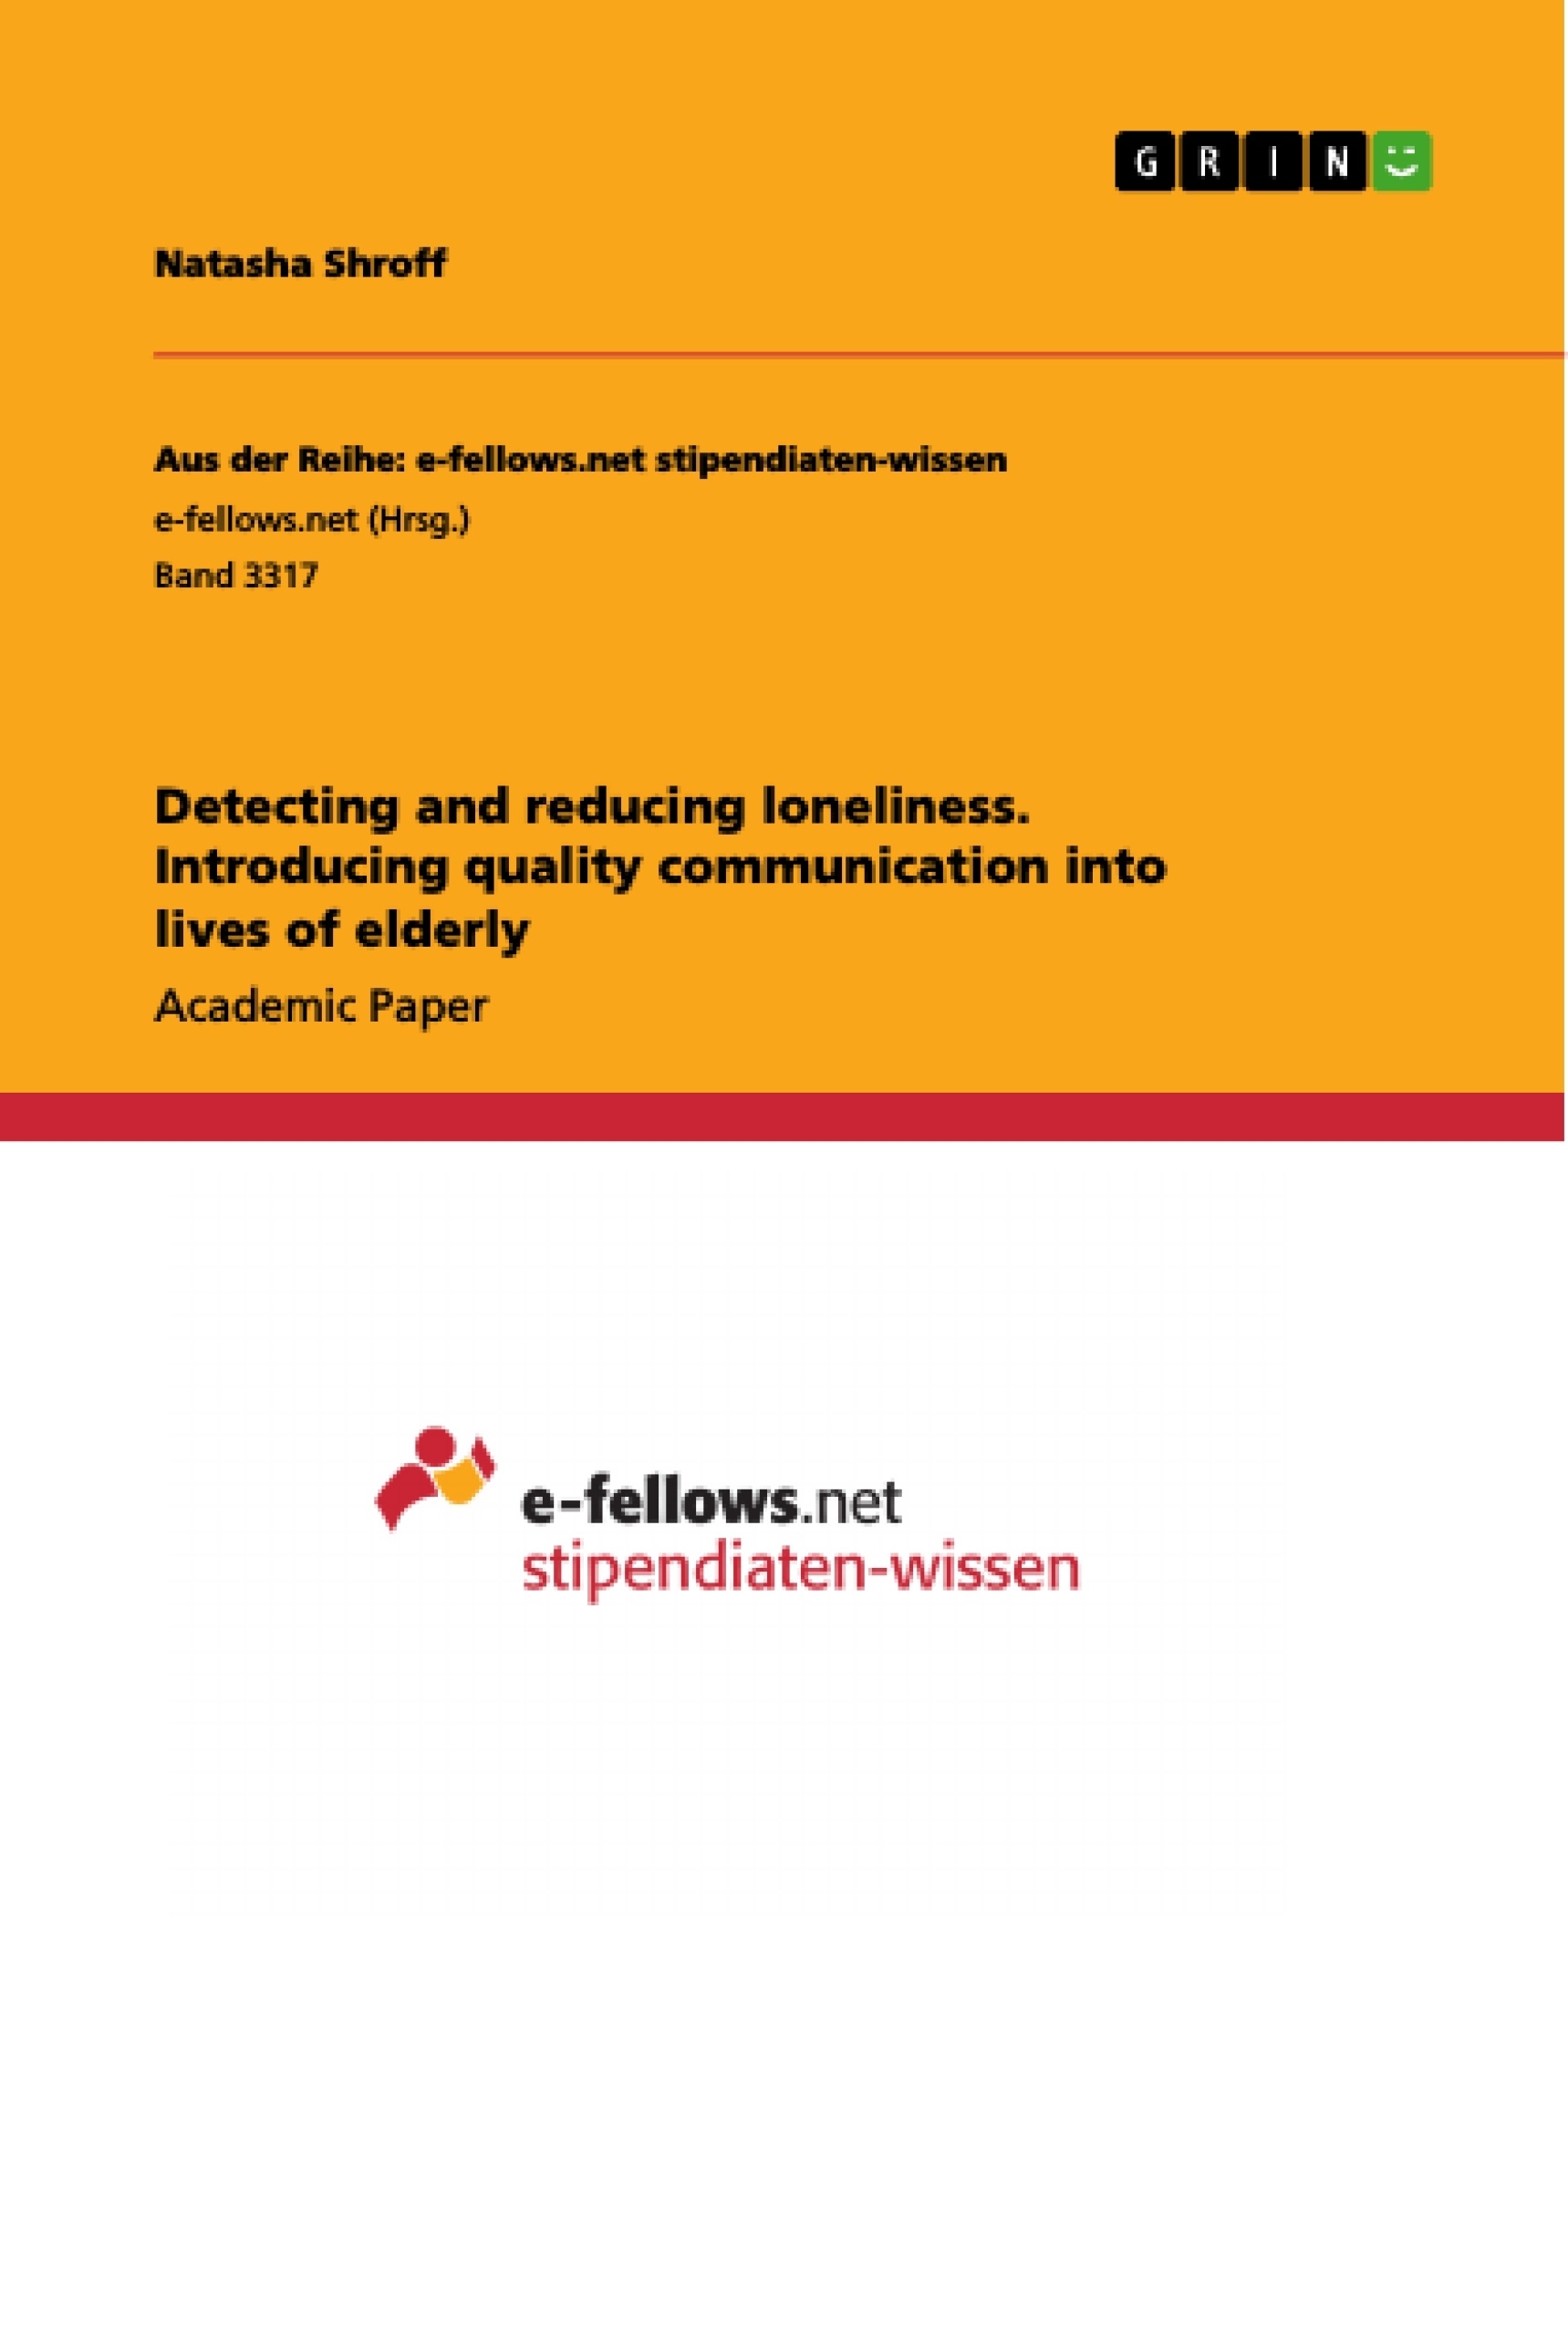 Titel: Detecting and reducing loneliness. Introducing quality communication into lives of elderly